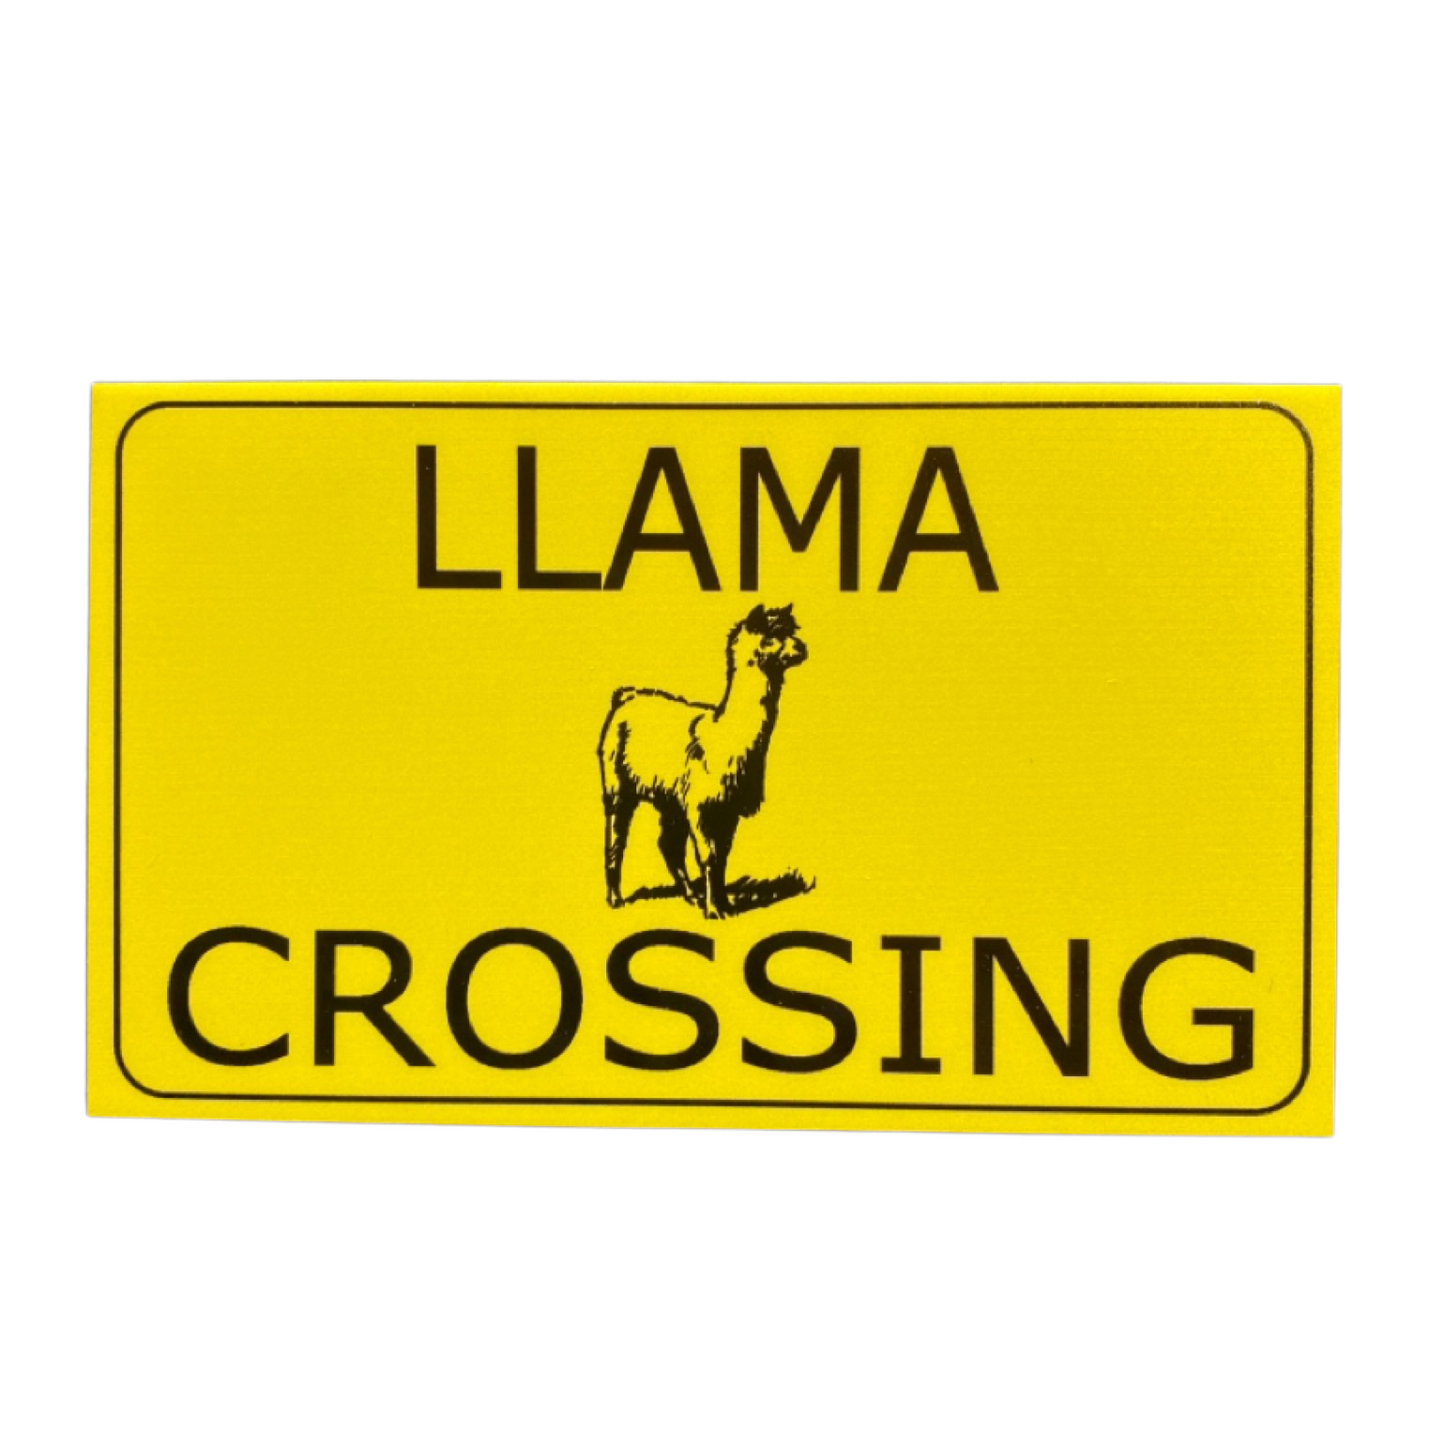 Llama Crossing Sign - The Renmy Store Homewares & Gifts 